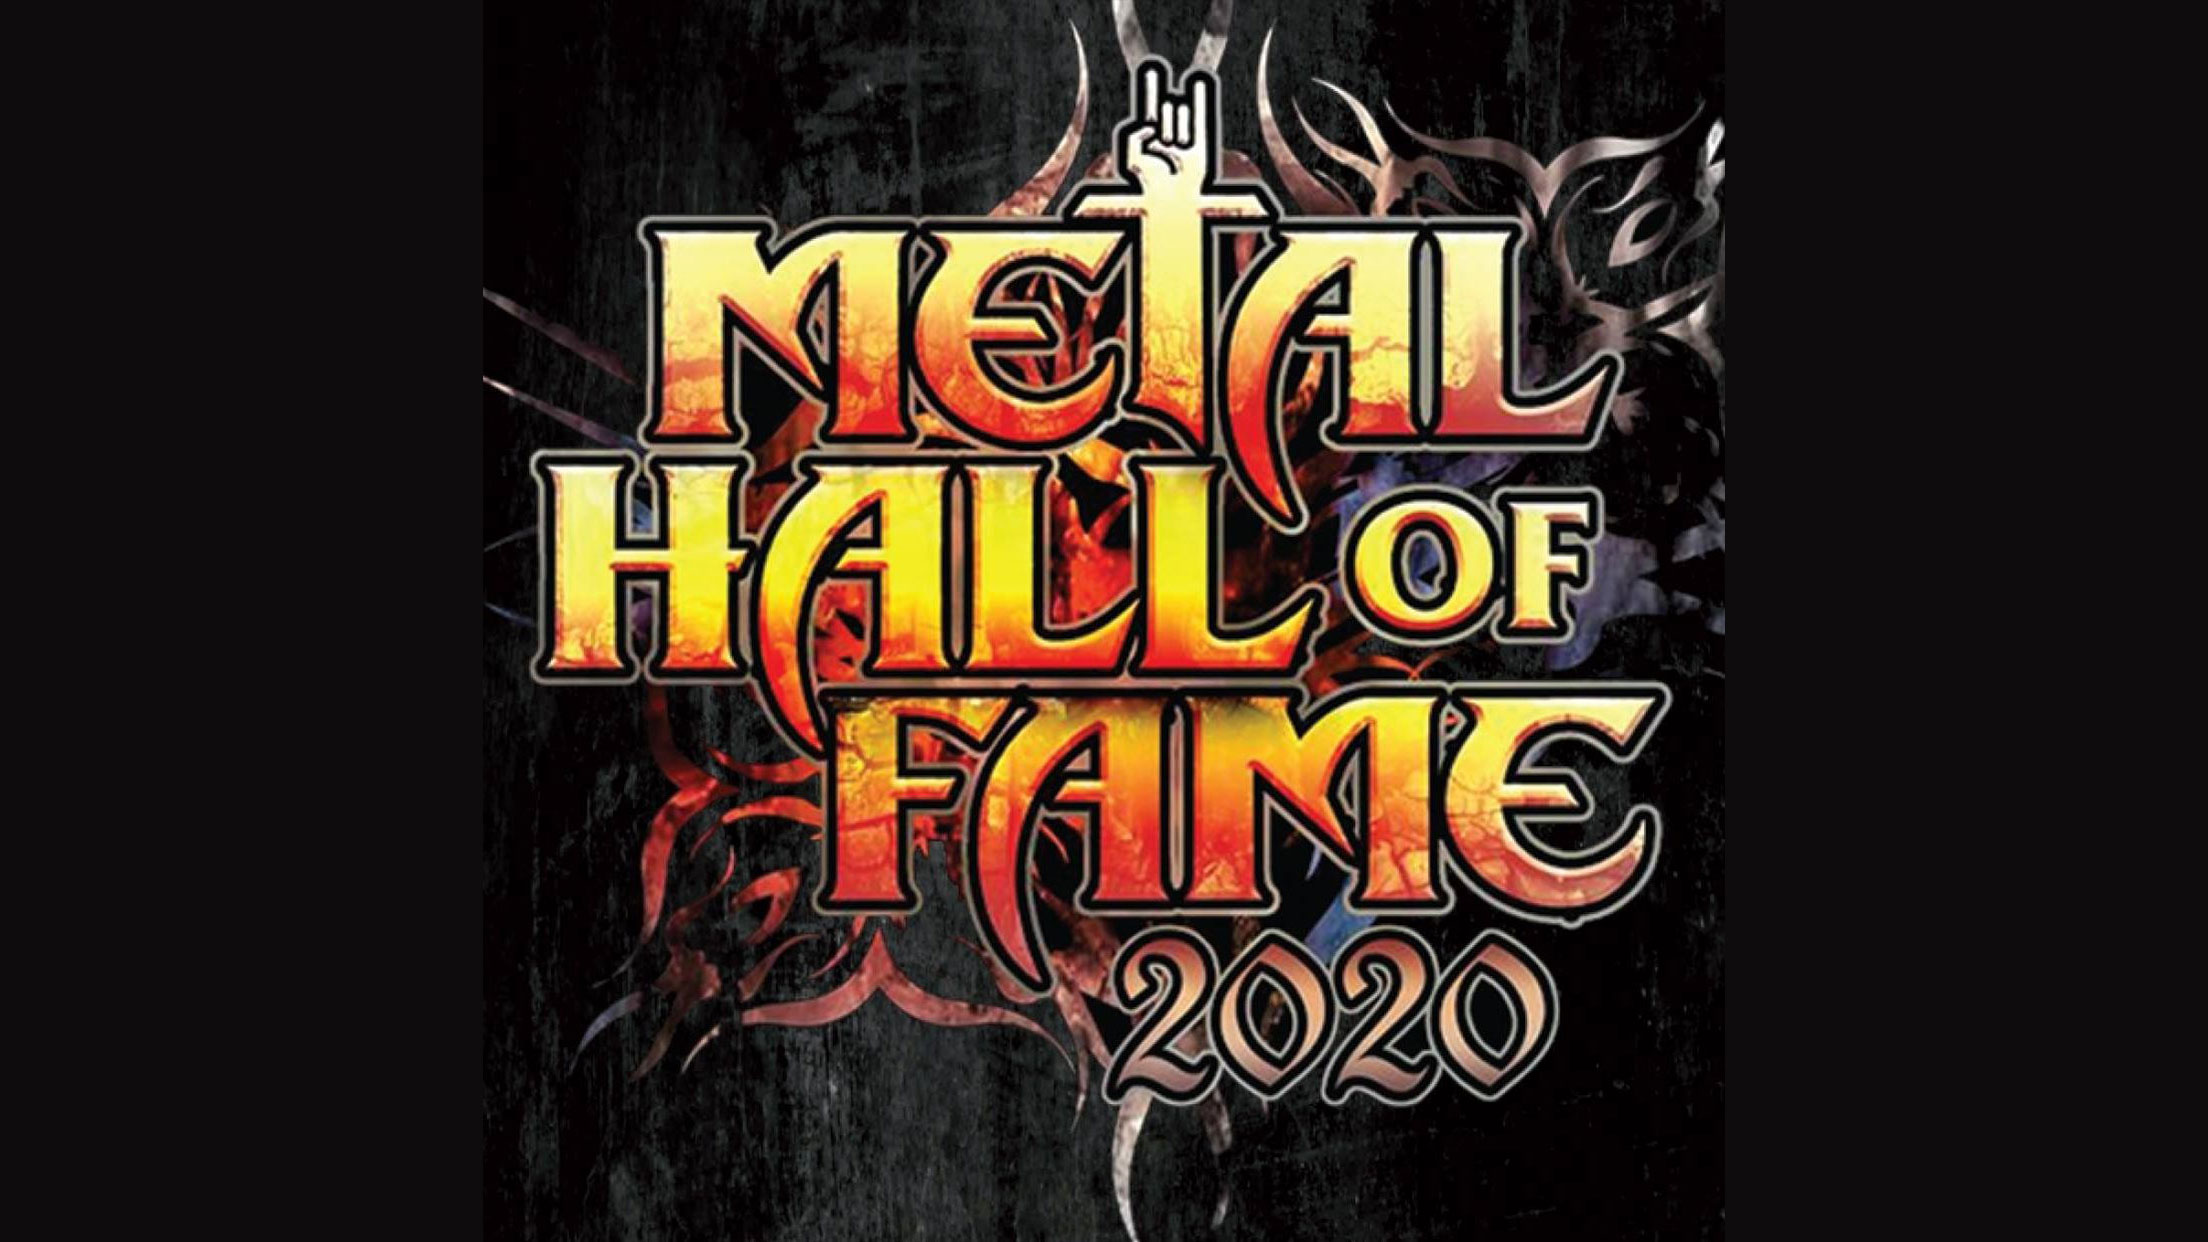 2020 Metal Hall of Fame Gala to Be Filmed for World Premiere on Amazon Prime